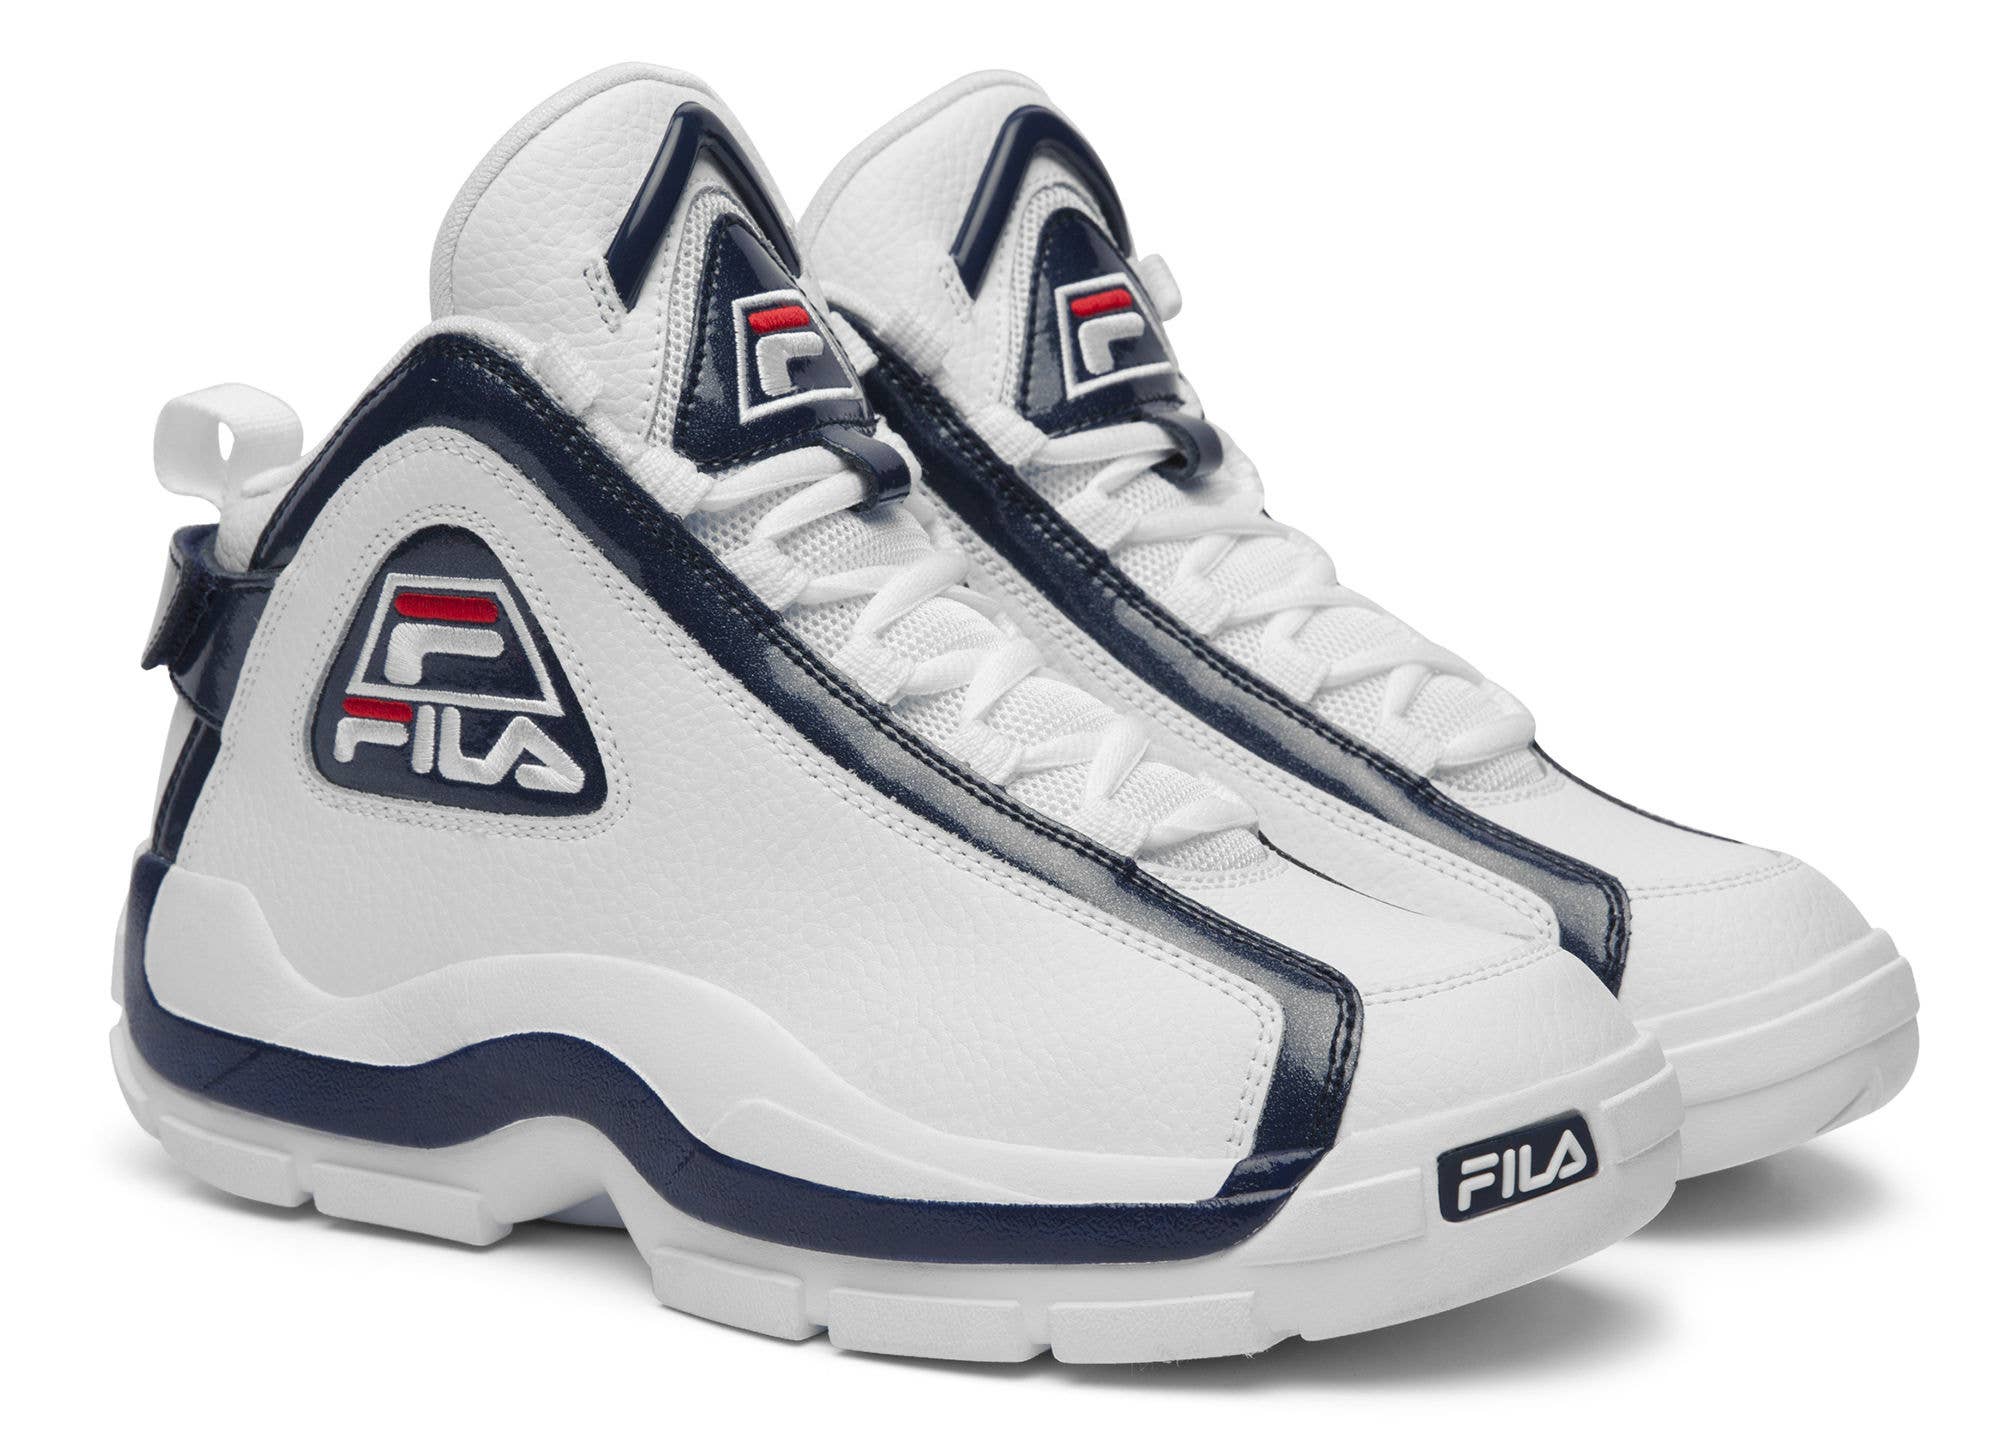 Walter's Team Up to Bring Back the OG Grant Hill 2 | Complex